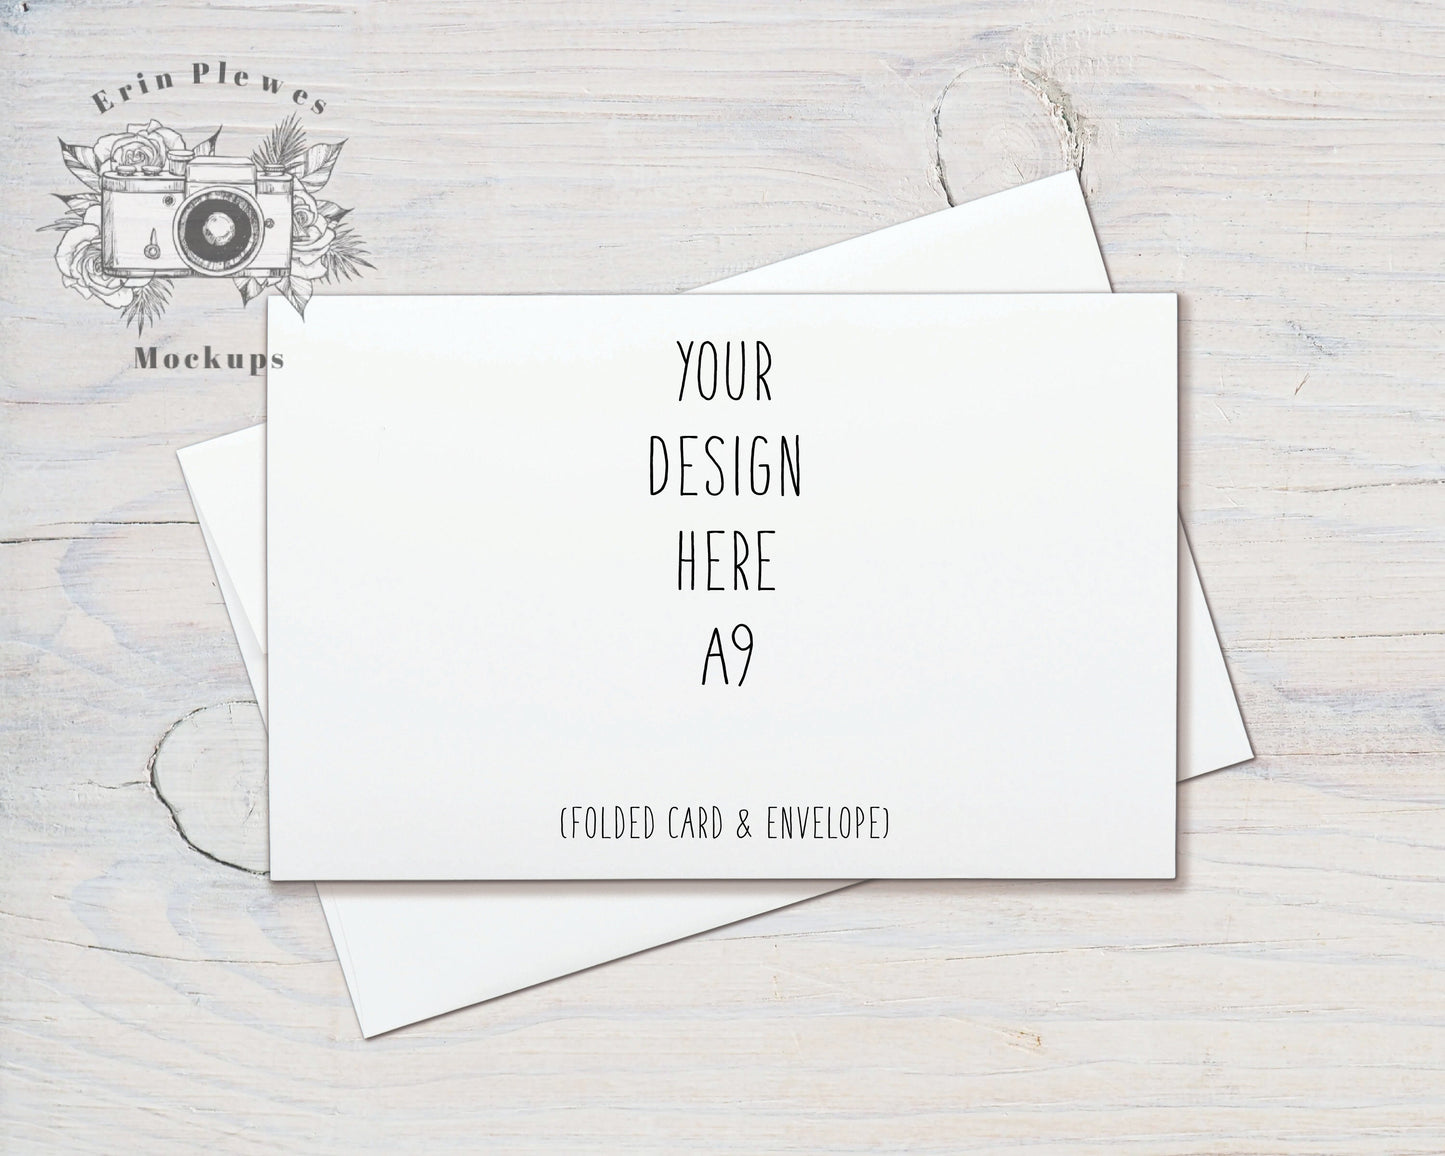 Card Mockup A-9, A9 Card Mock Up PSD Smart Object, 5.5" x 8.5" Greeting Card with Envelope Mock-up, Jpeg Instant Digital Download Template